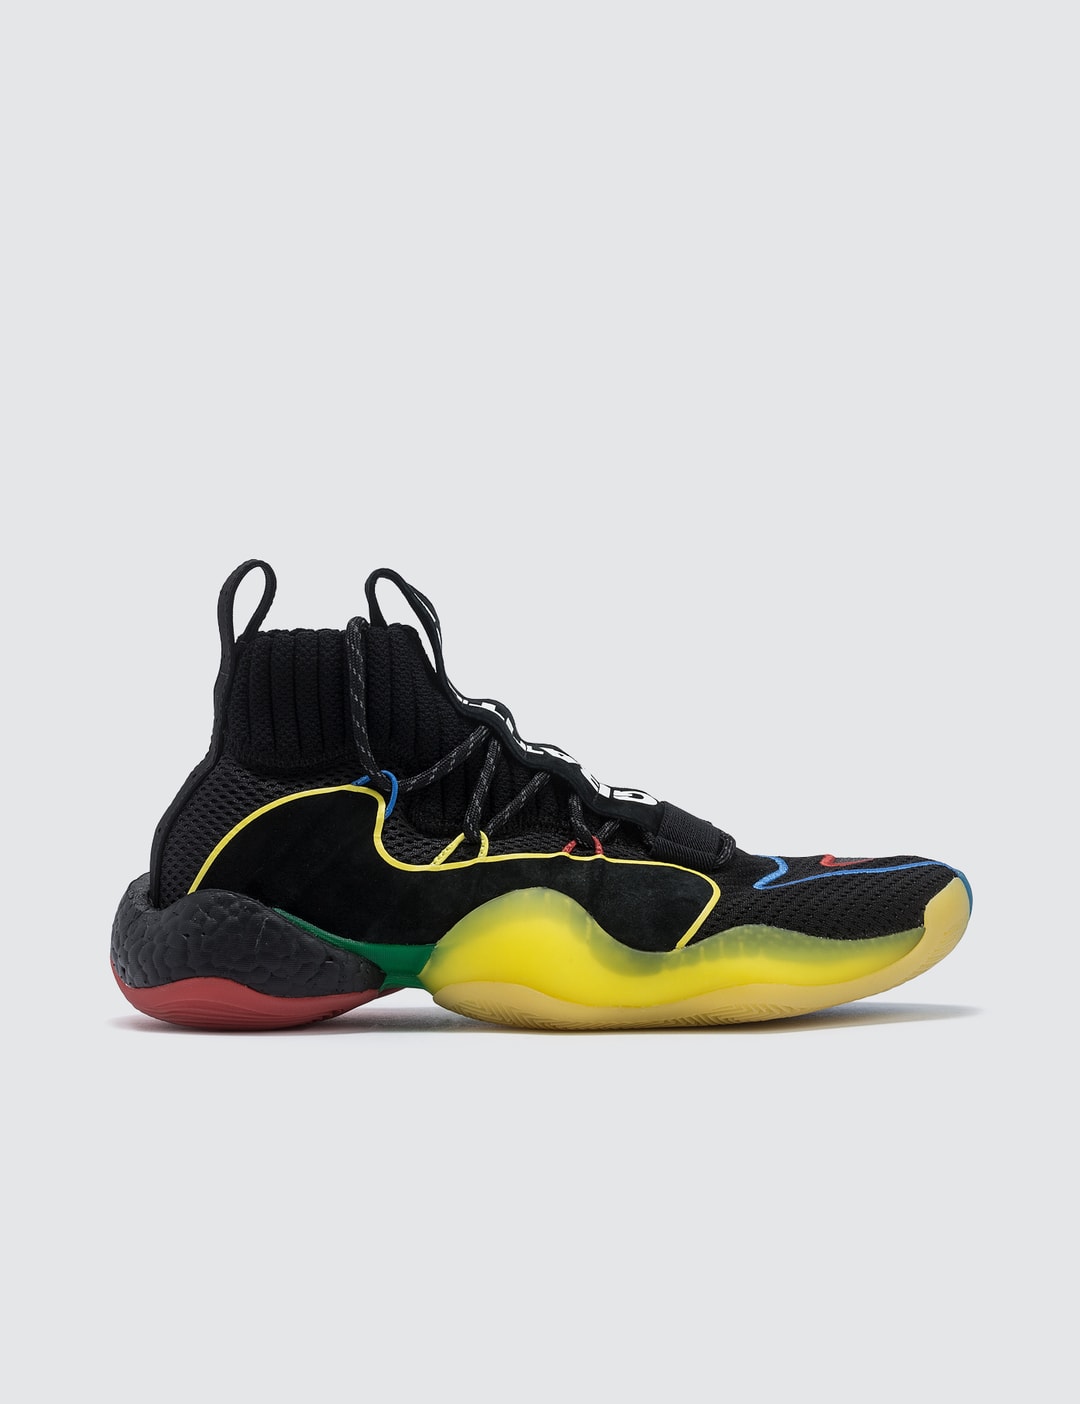 Screenplay Infectious disease human resources Adidas Originals - Pharrell Williams x Adidas Crazy BYW LVL X | HBX -  Globally Curated Fashion and Lifestyle by Hypebeast